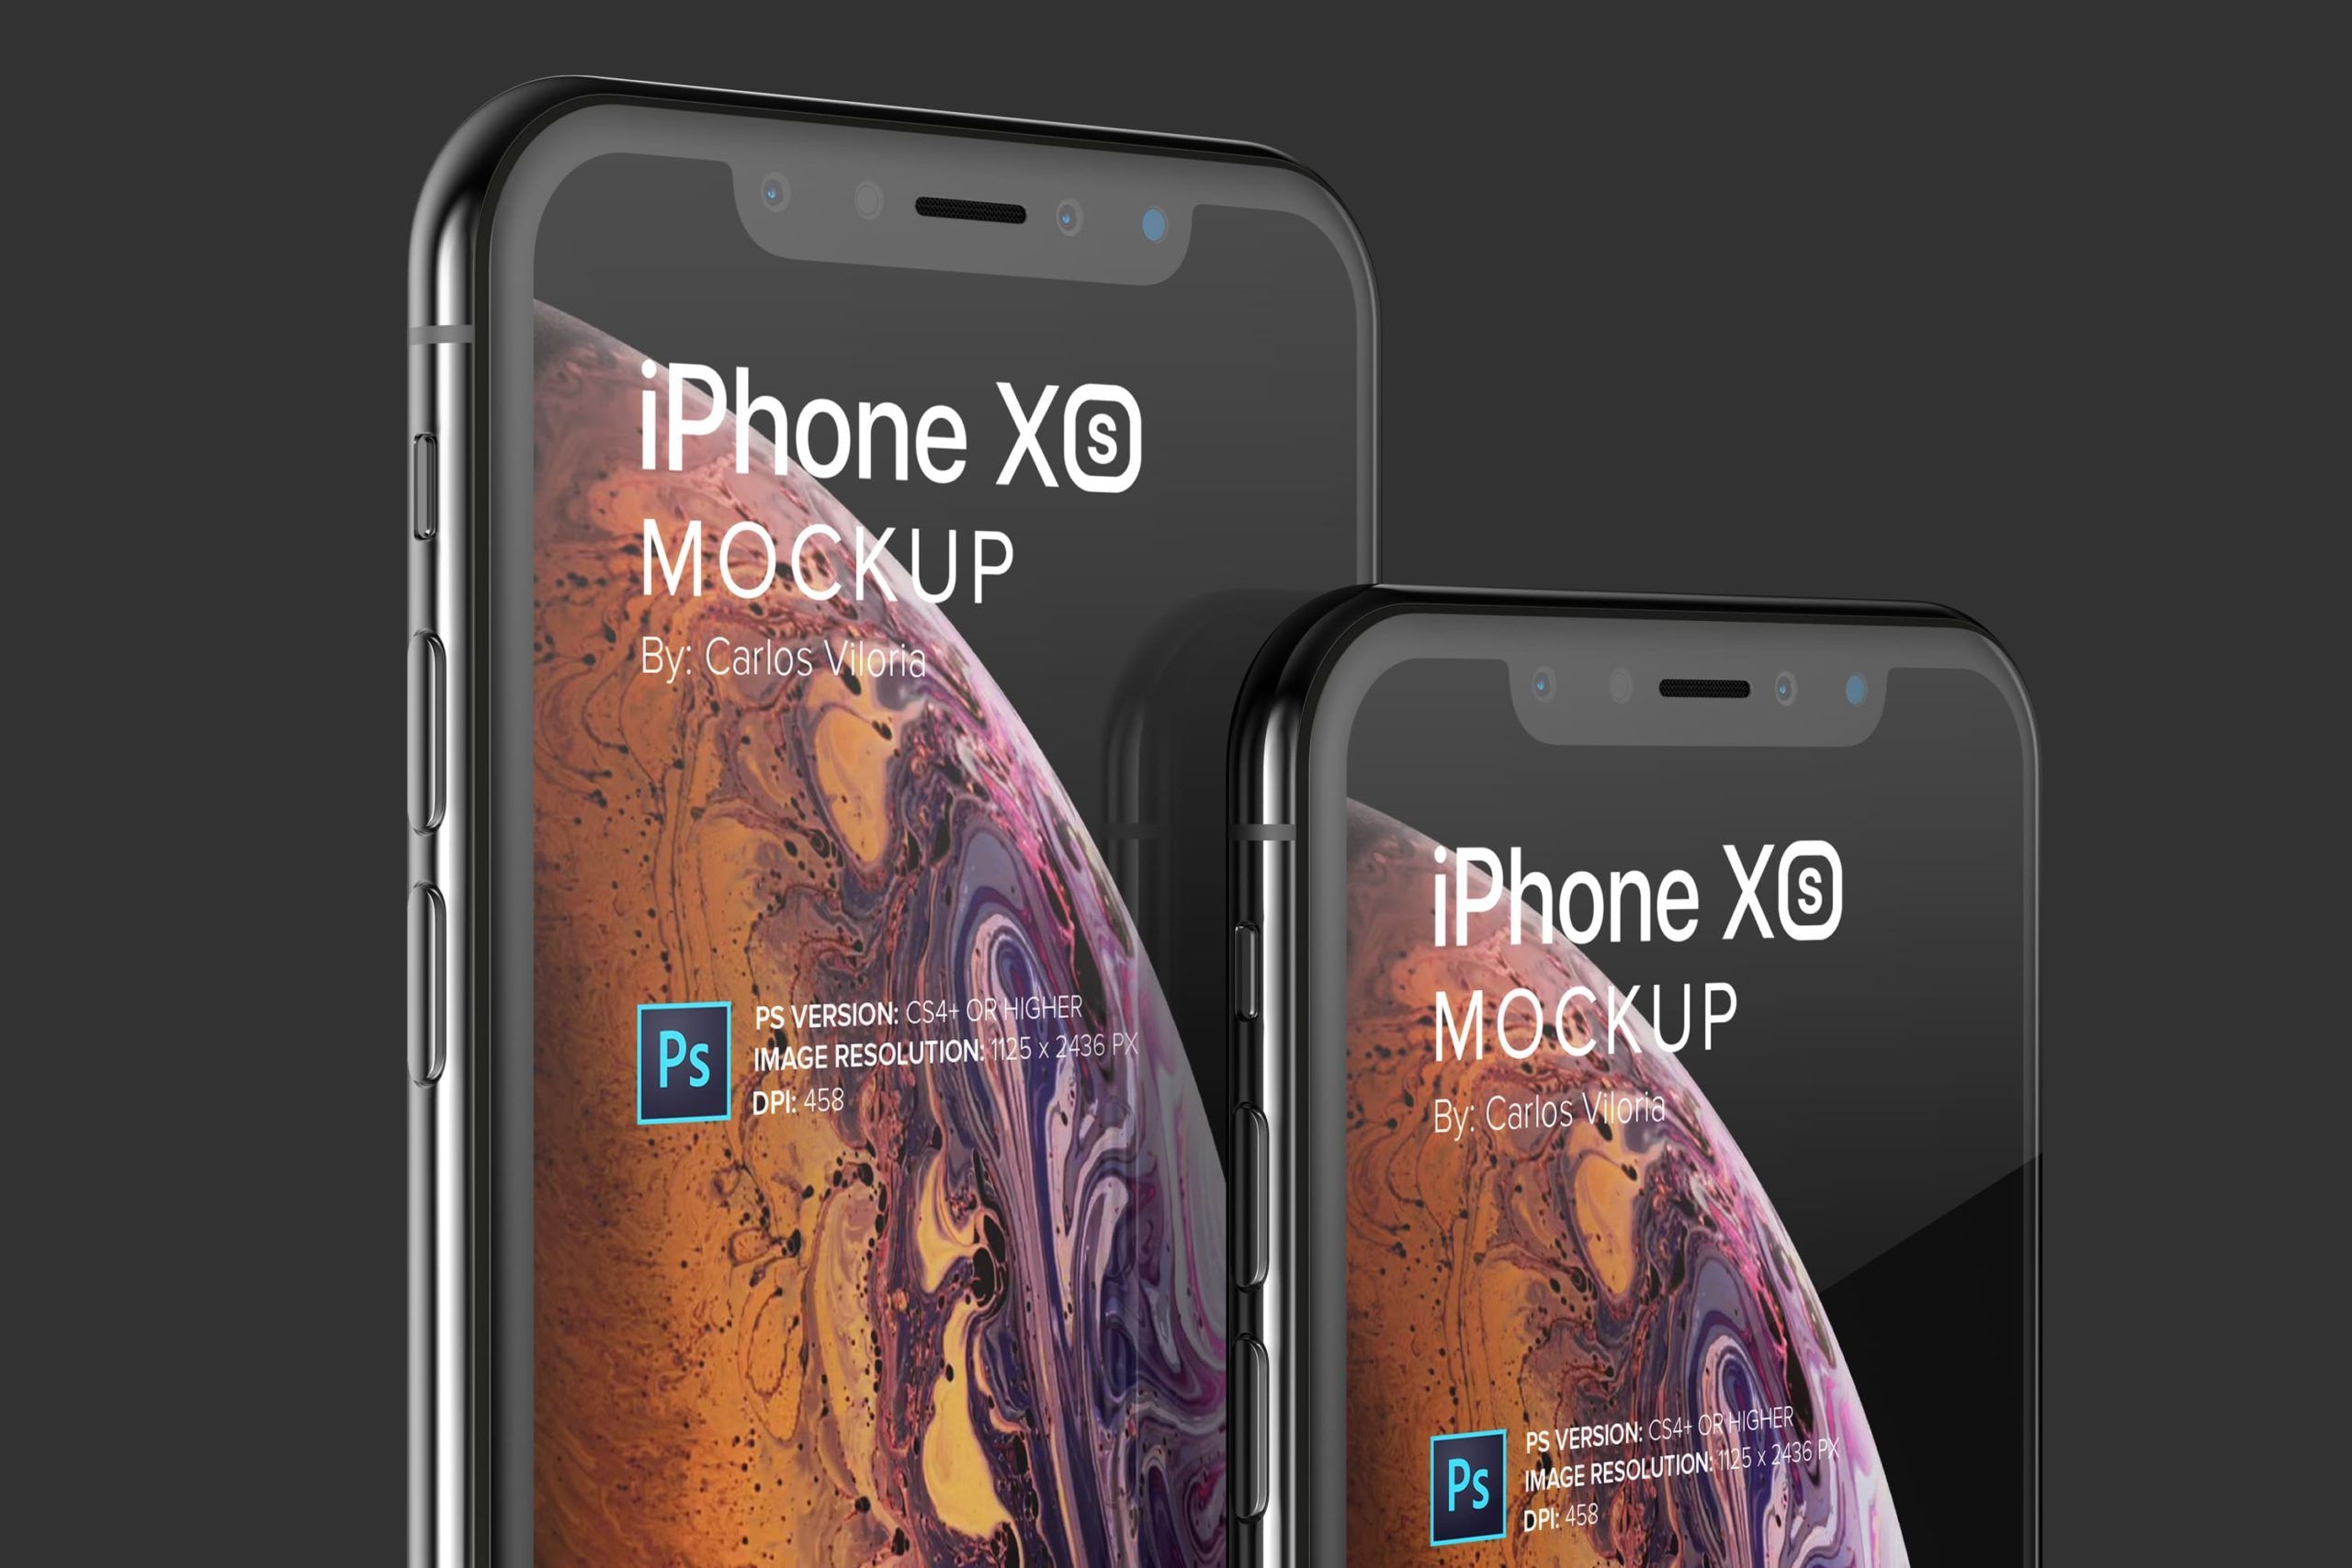 Iphone Xs Mockup for Close Up Views